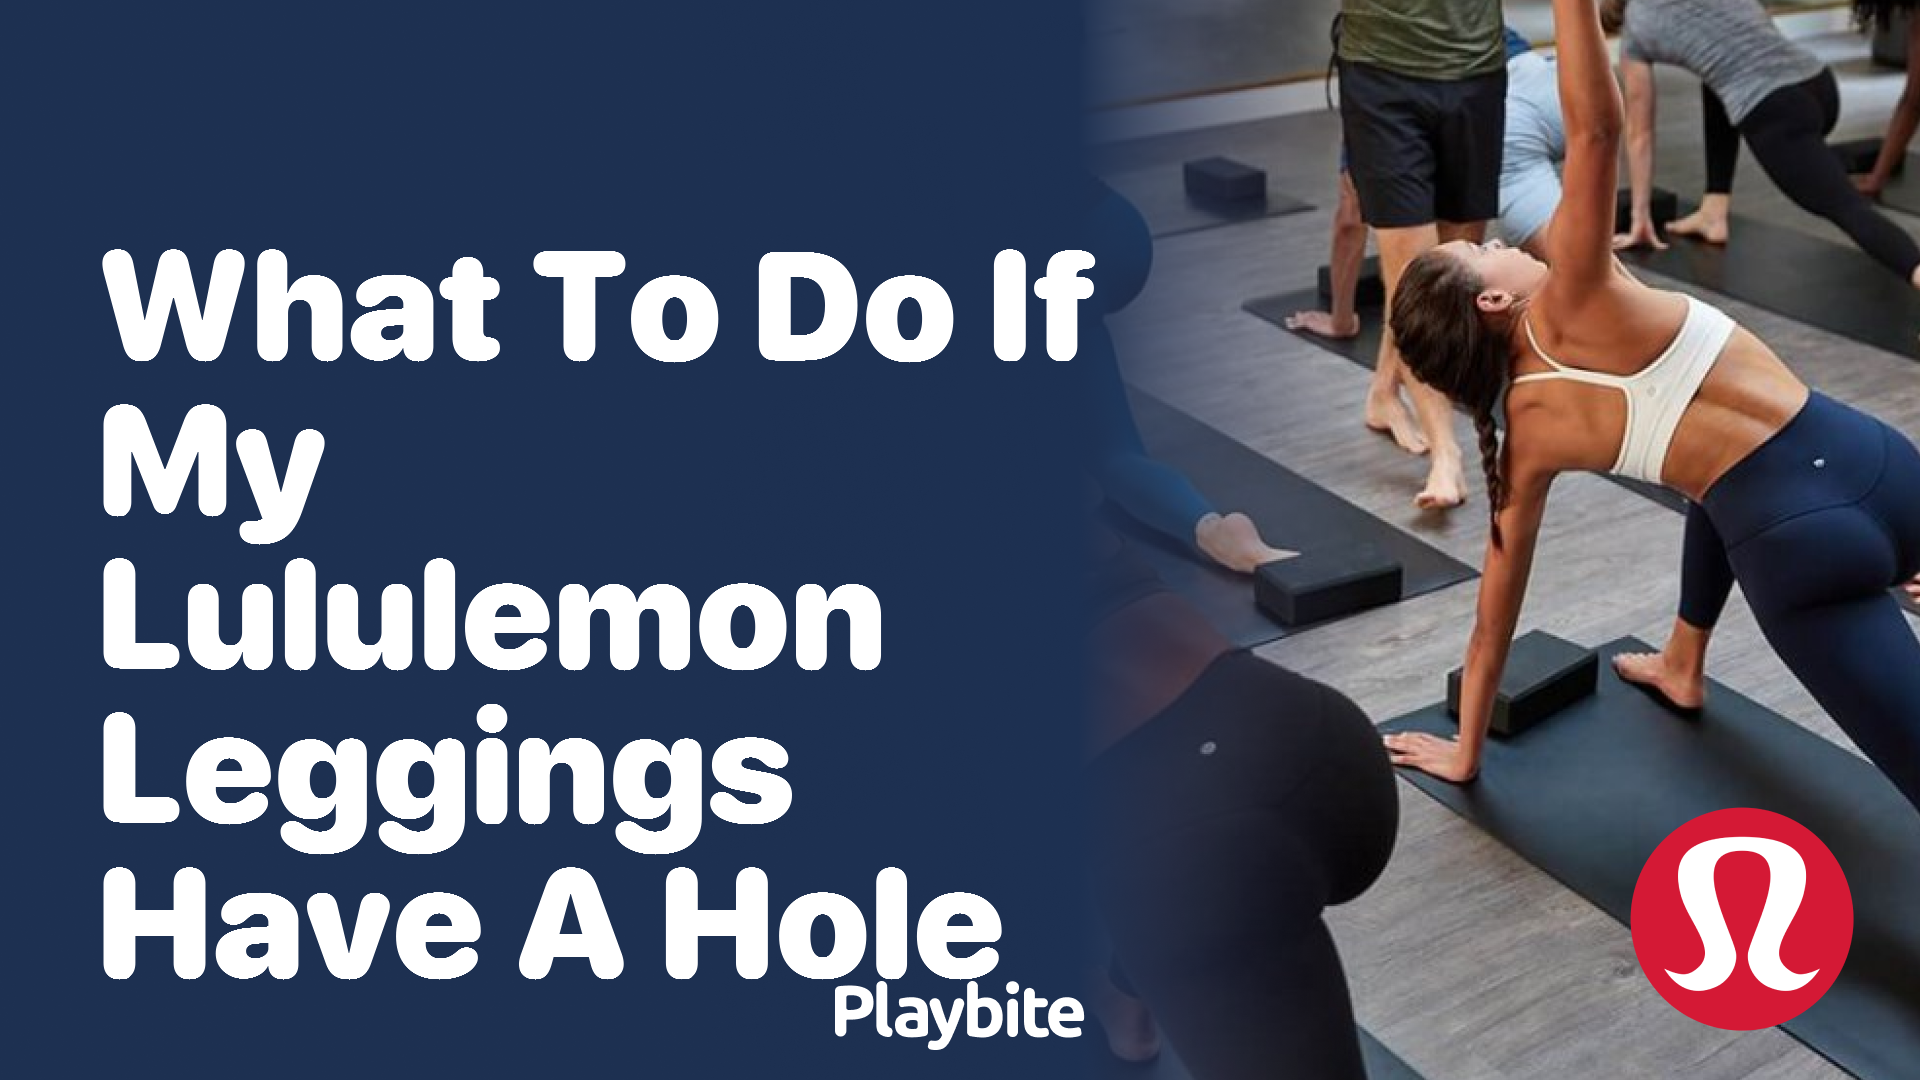 What to Do If Your Lululemon Leggings Have a Hole - Playbite